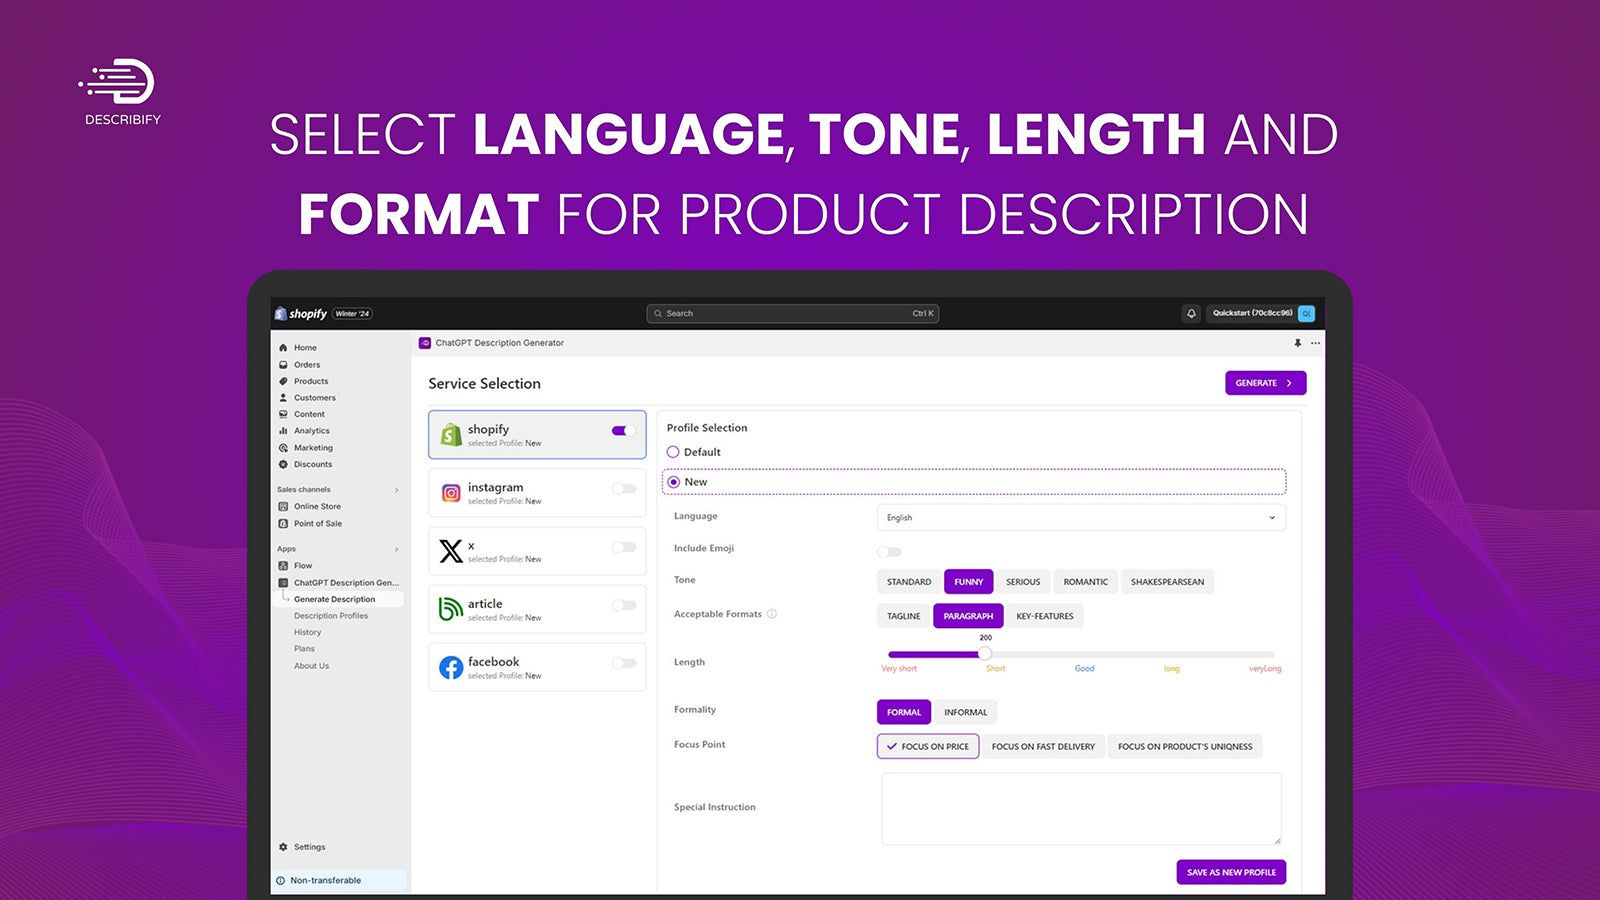 Select language, tone, length and format for product description